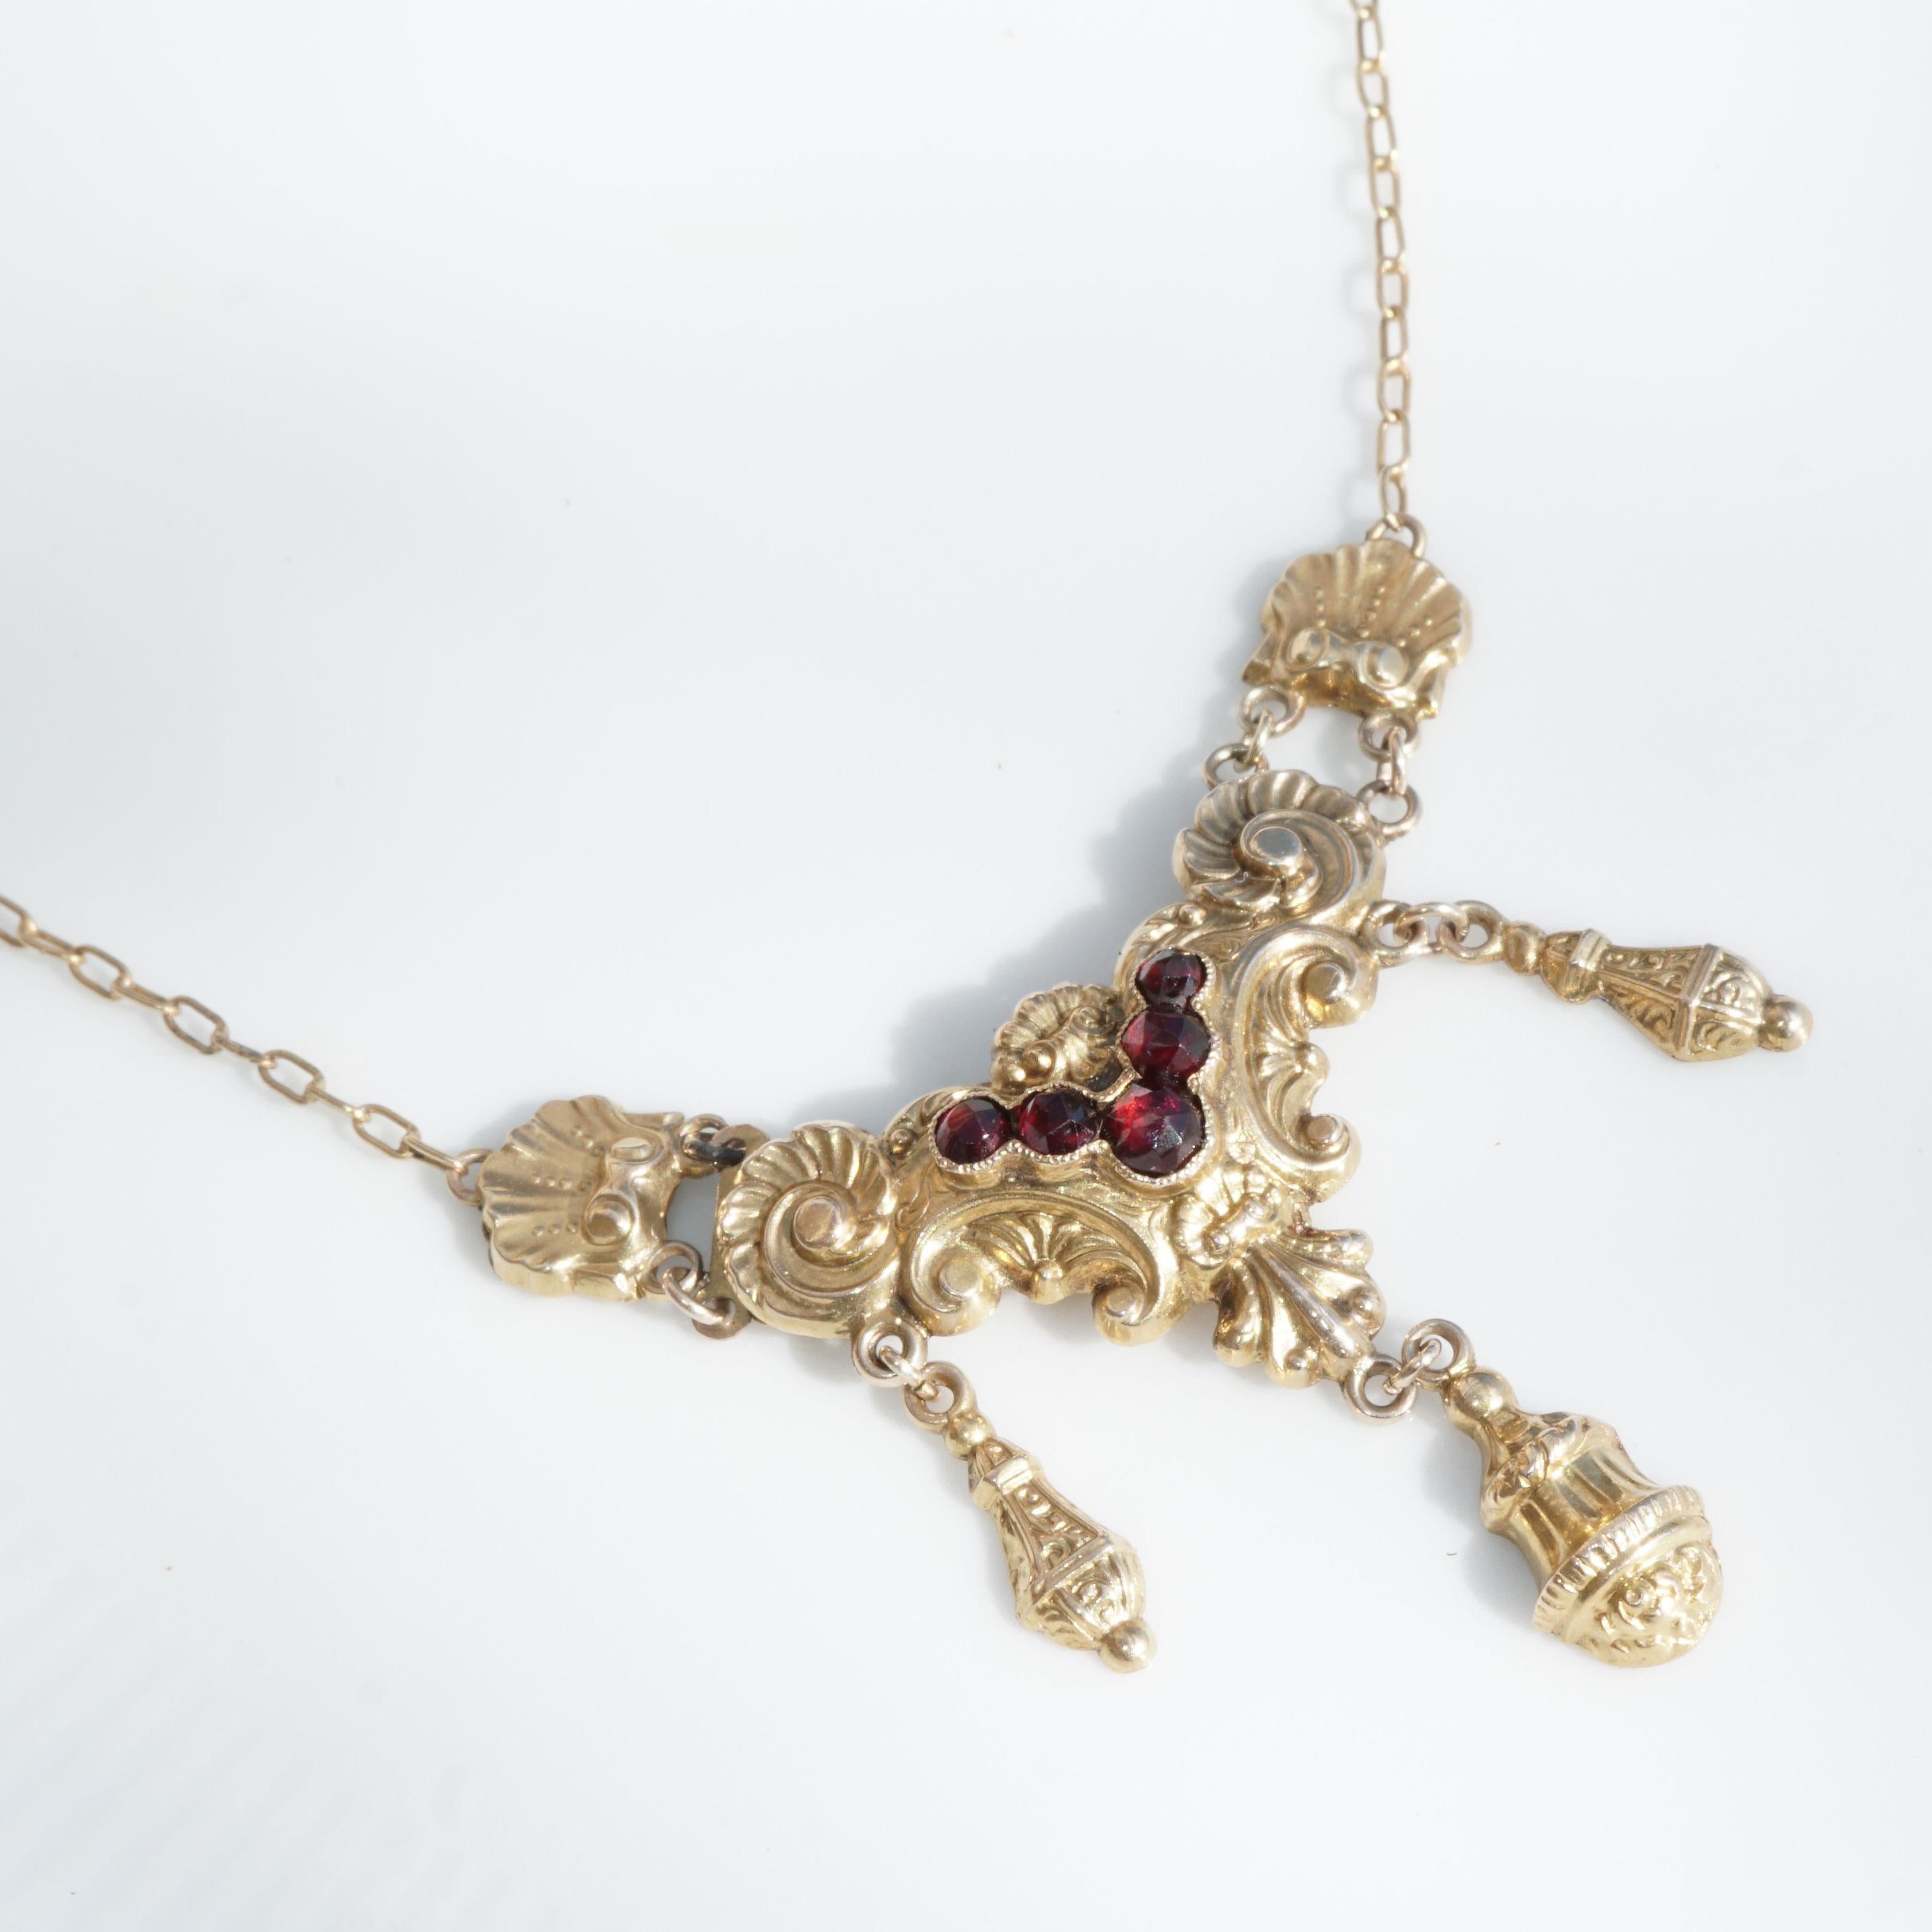 Biedermeier Necklace around 1840 rolled Gold on Silver with Chain well condition 2